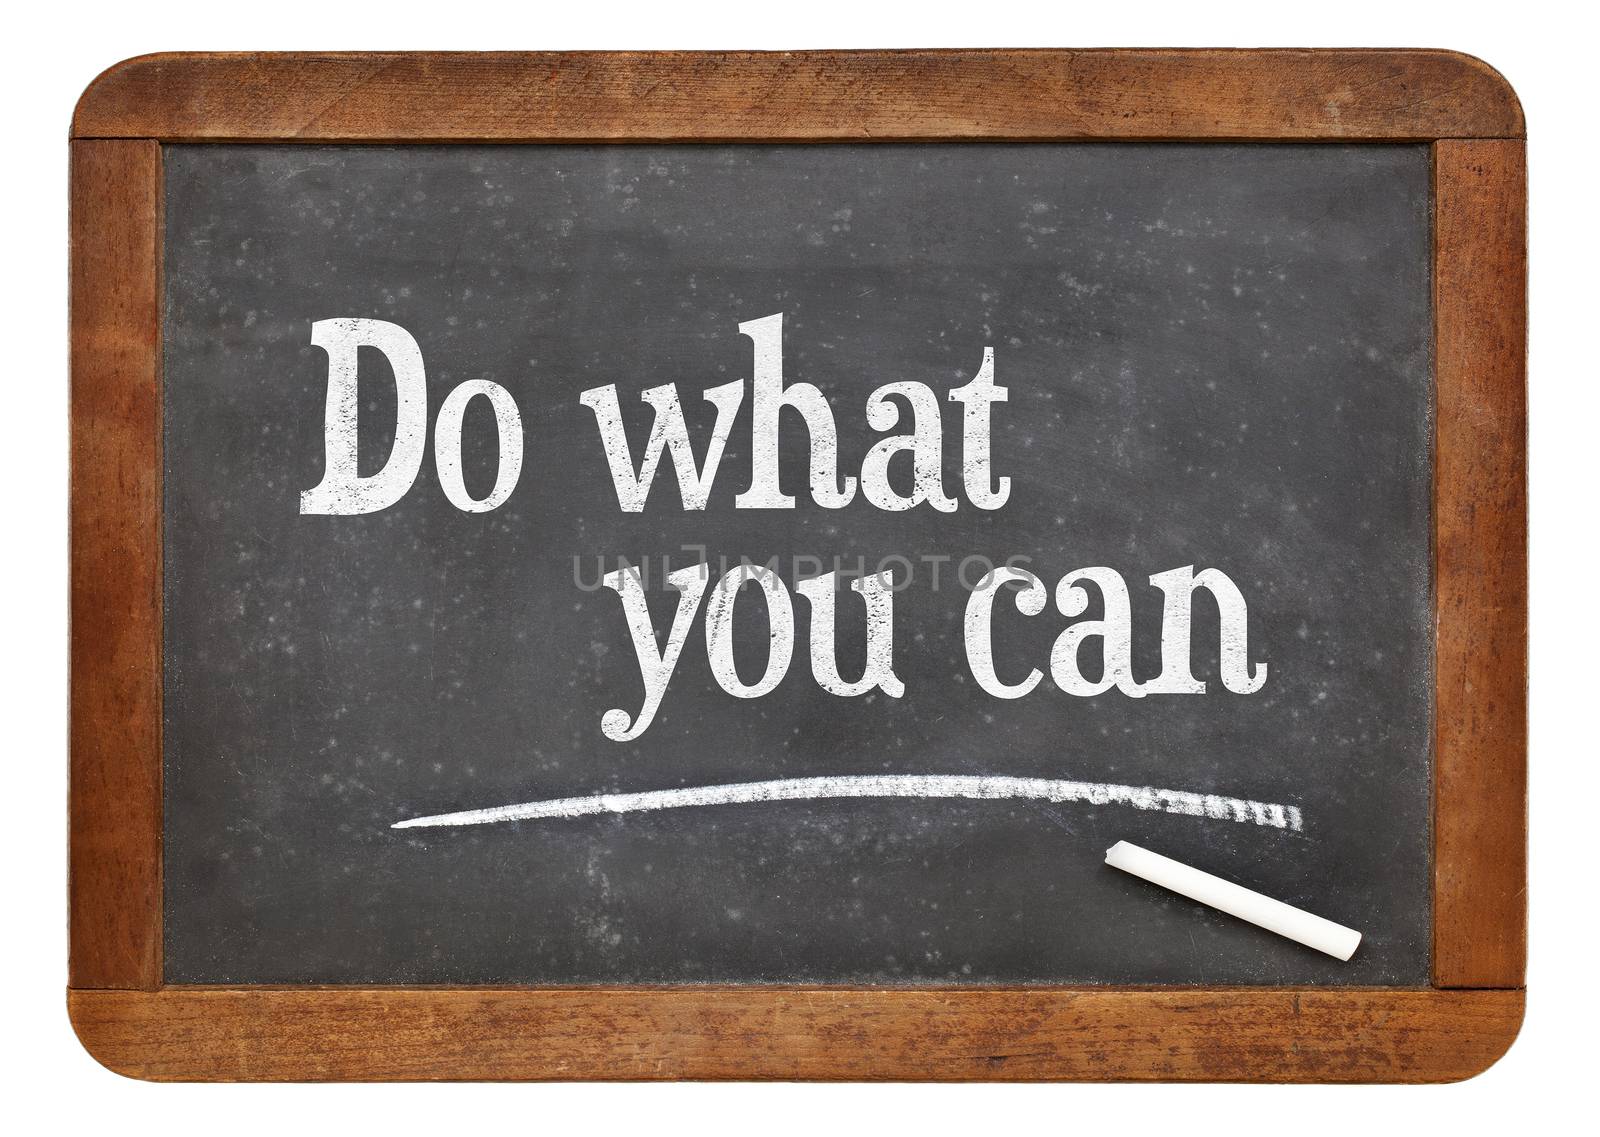 Do what you can - motivational text in white chalk on a vintage slate blackboard